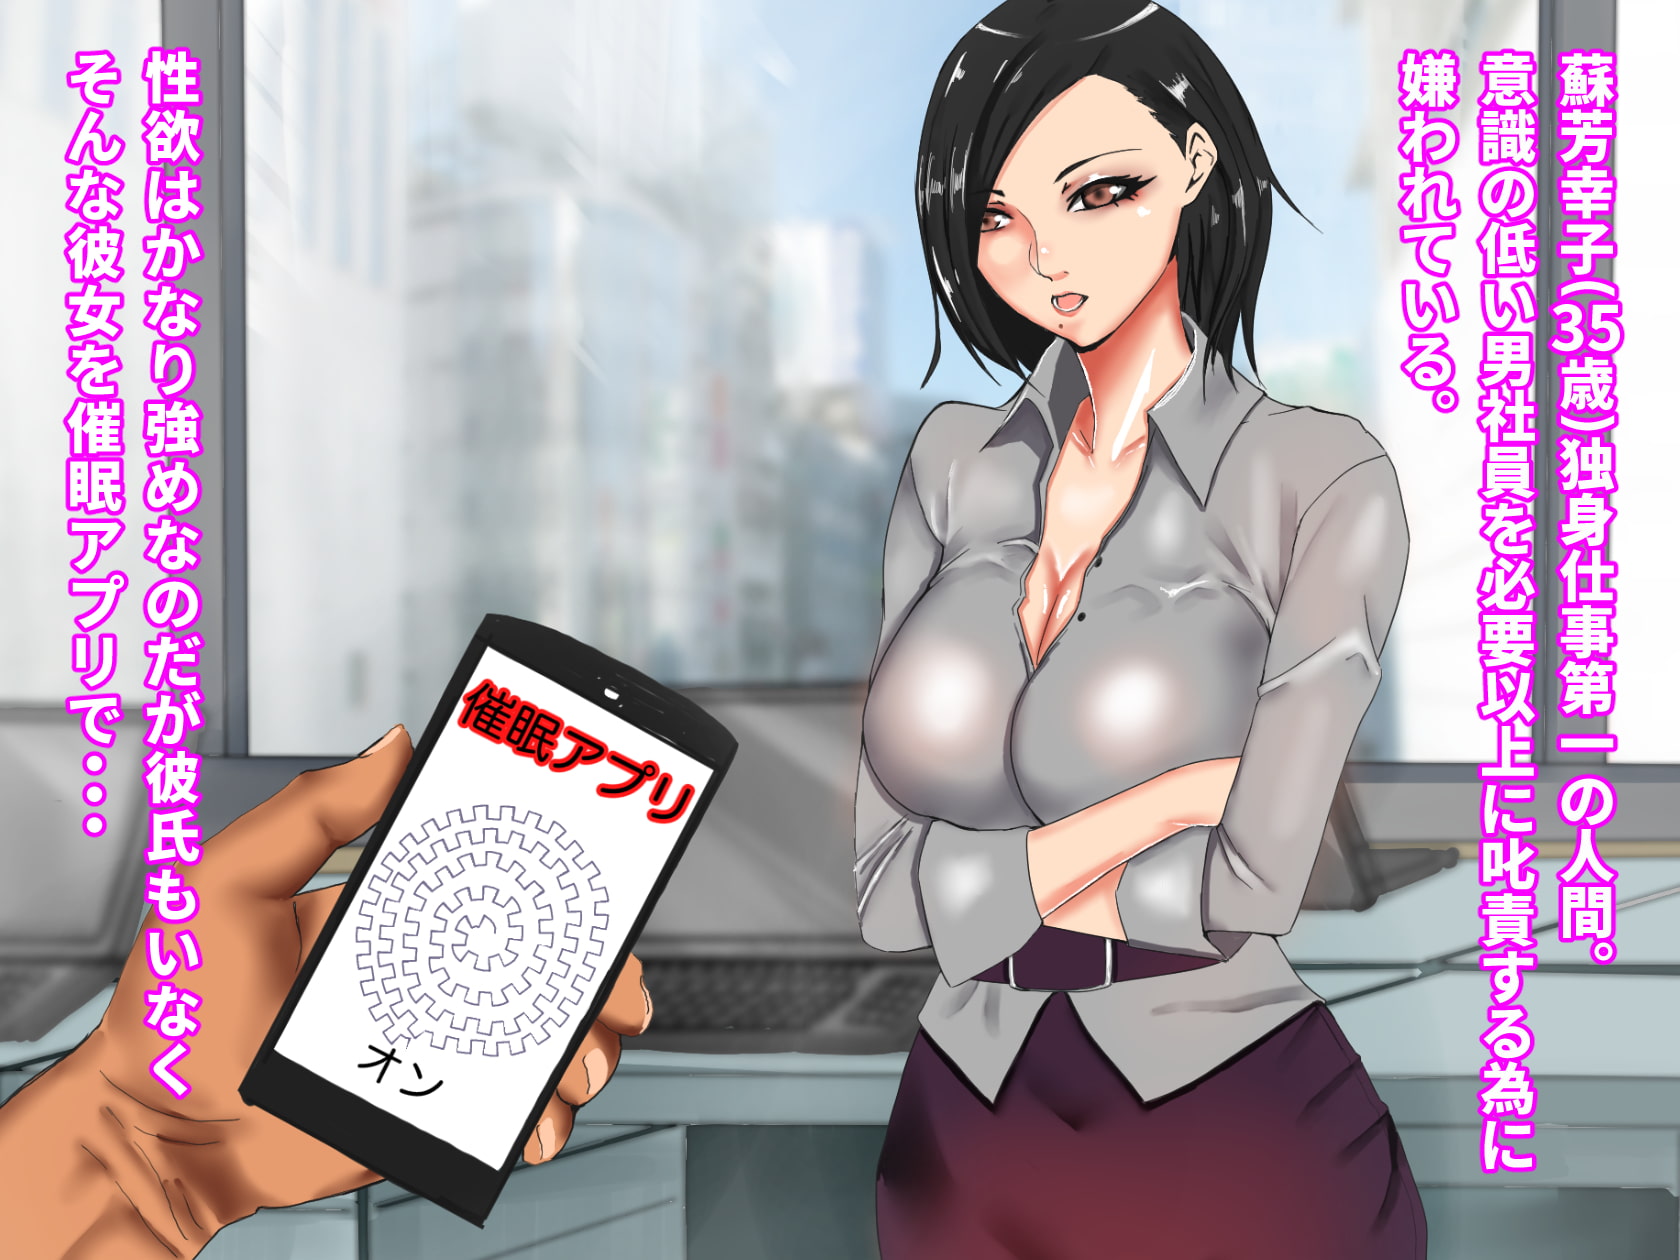 Making a Prideful Female Superior into a Sex Slave Using an App